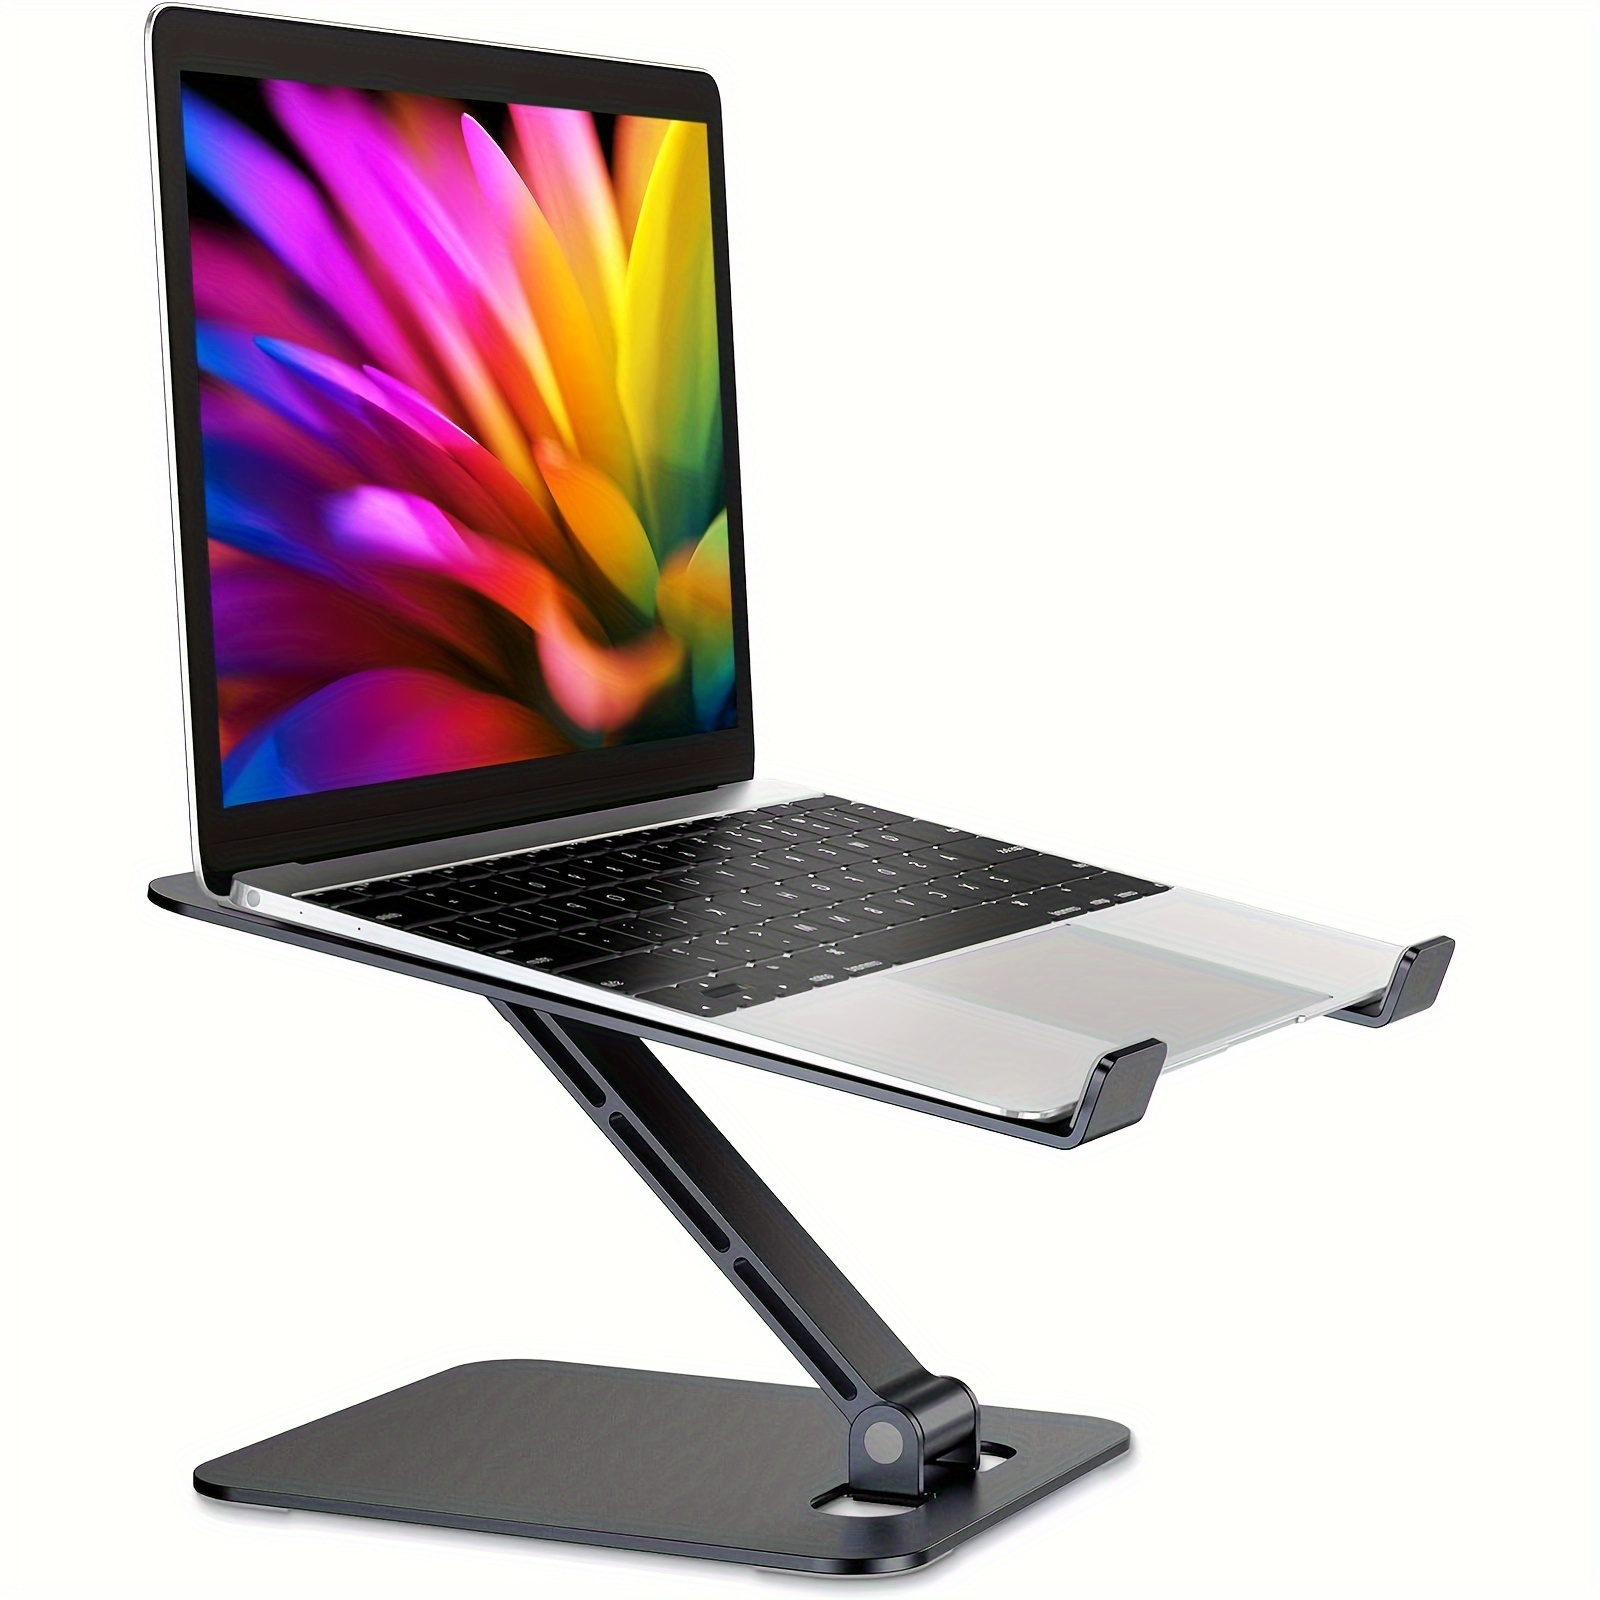 

Laptop Stand, Height Adjustable Ergonomic Computer Stand For Desk, Aluminum Portable Laptop Riser Holder Mount Compatible With Pro Air, All Notebooks 10-16" (black)